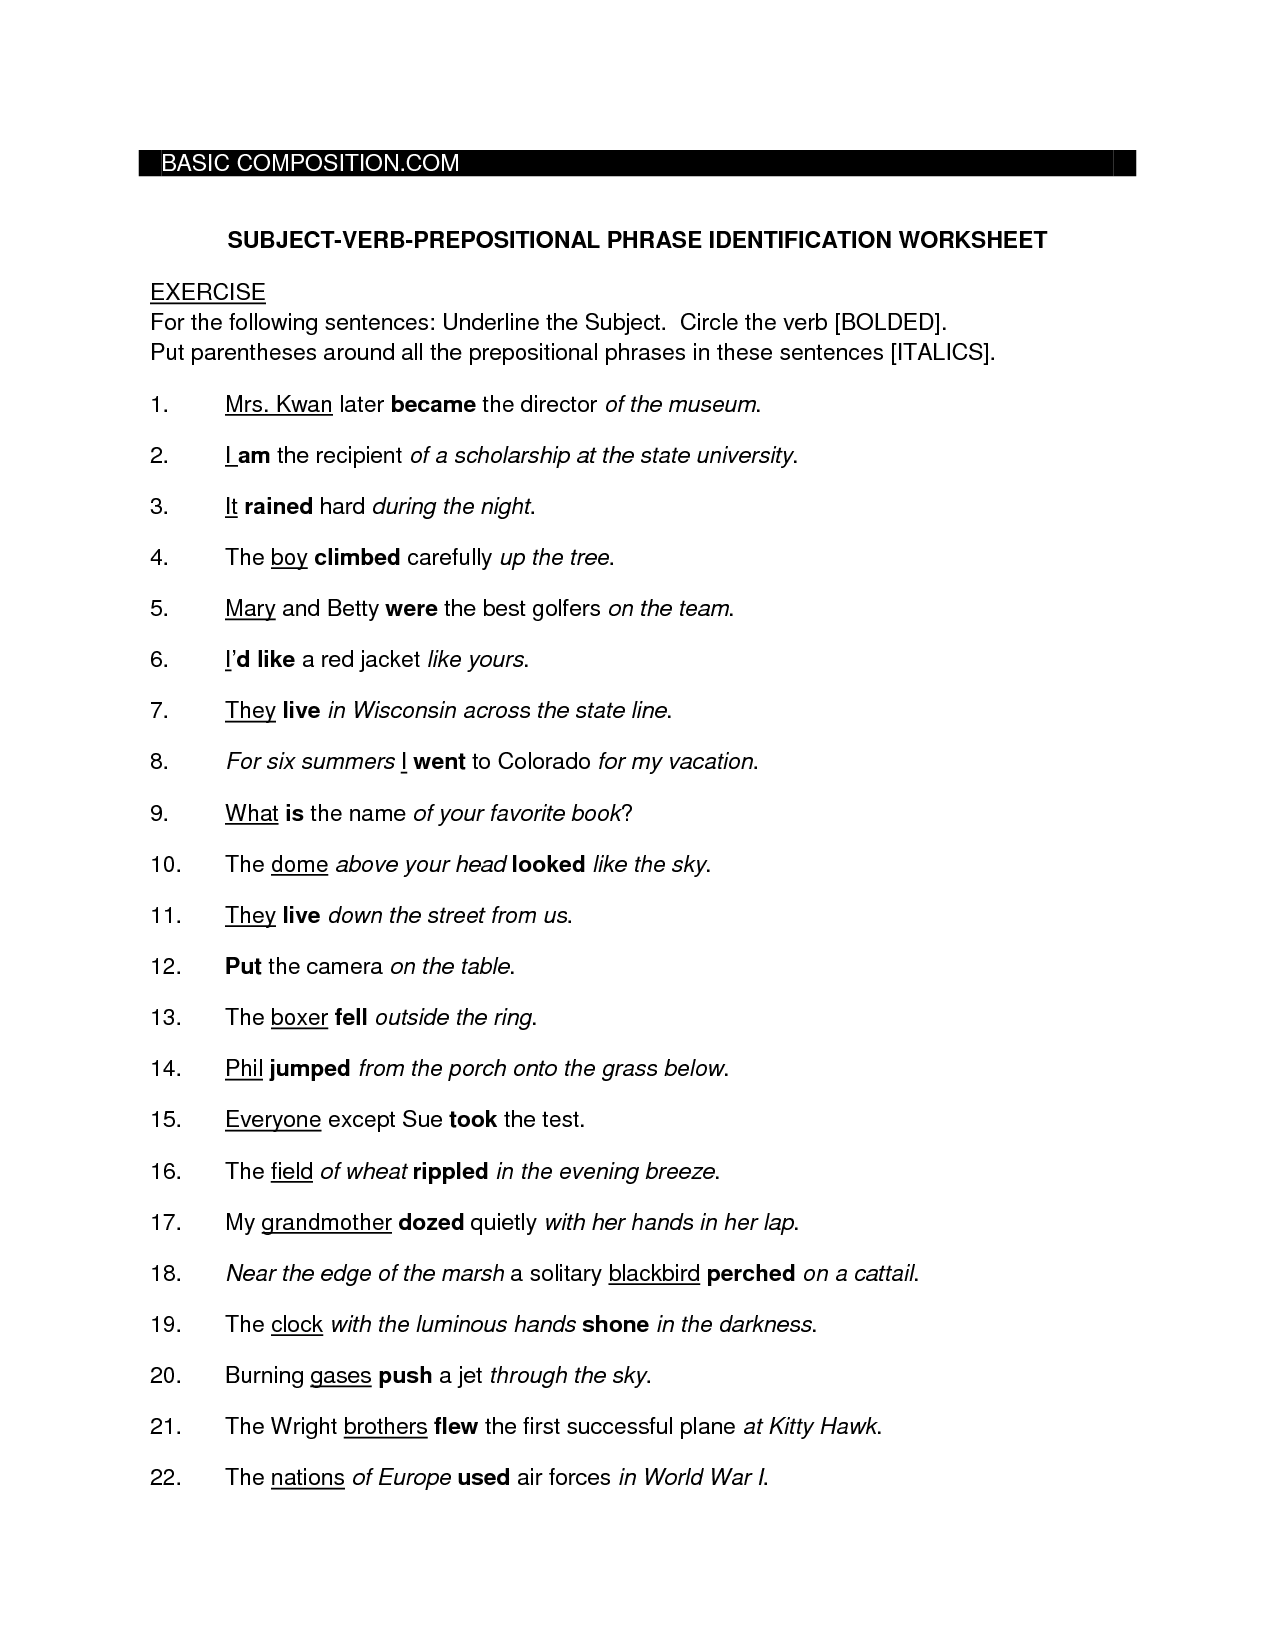 preposition-worksheets-two-ways-to-print-this-free-prepositions-educational-worksheet